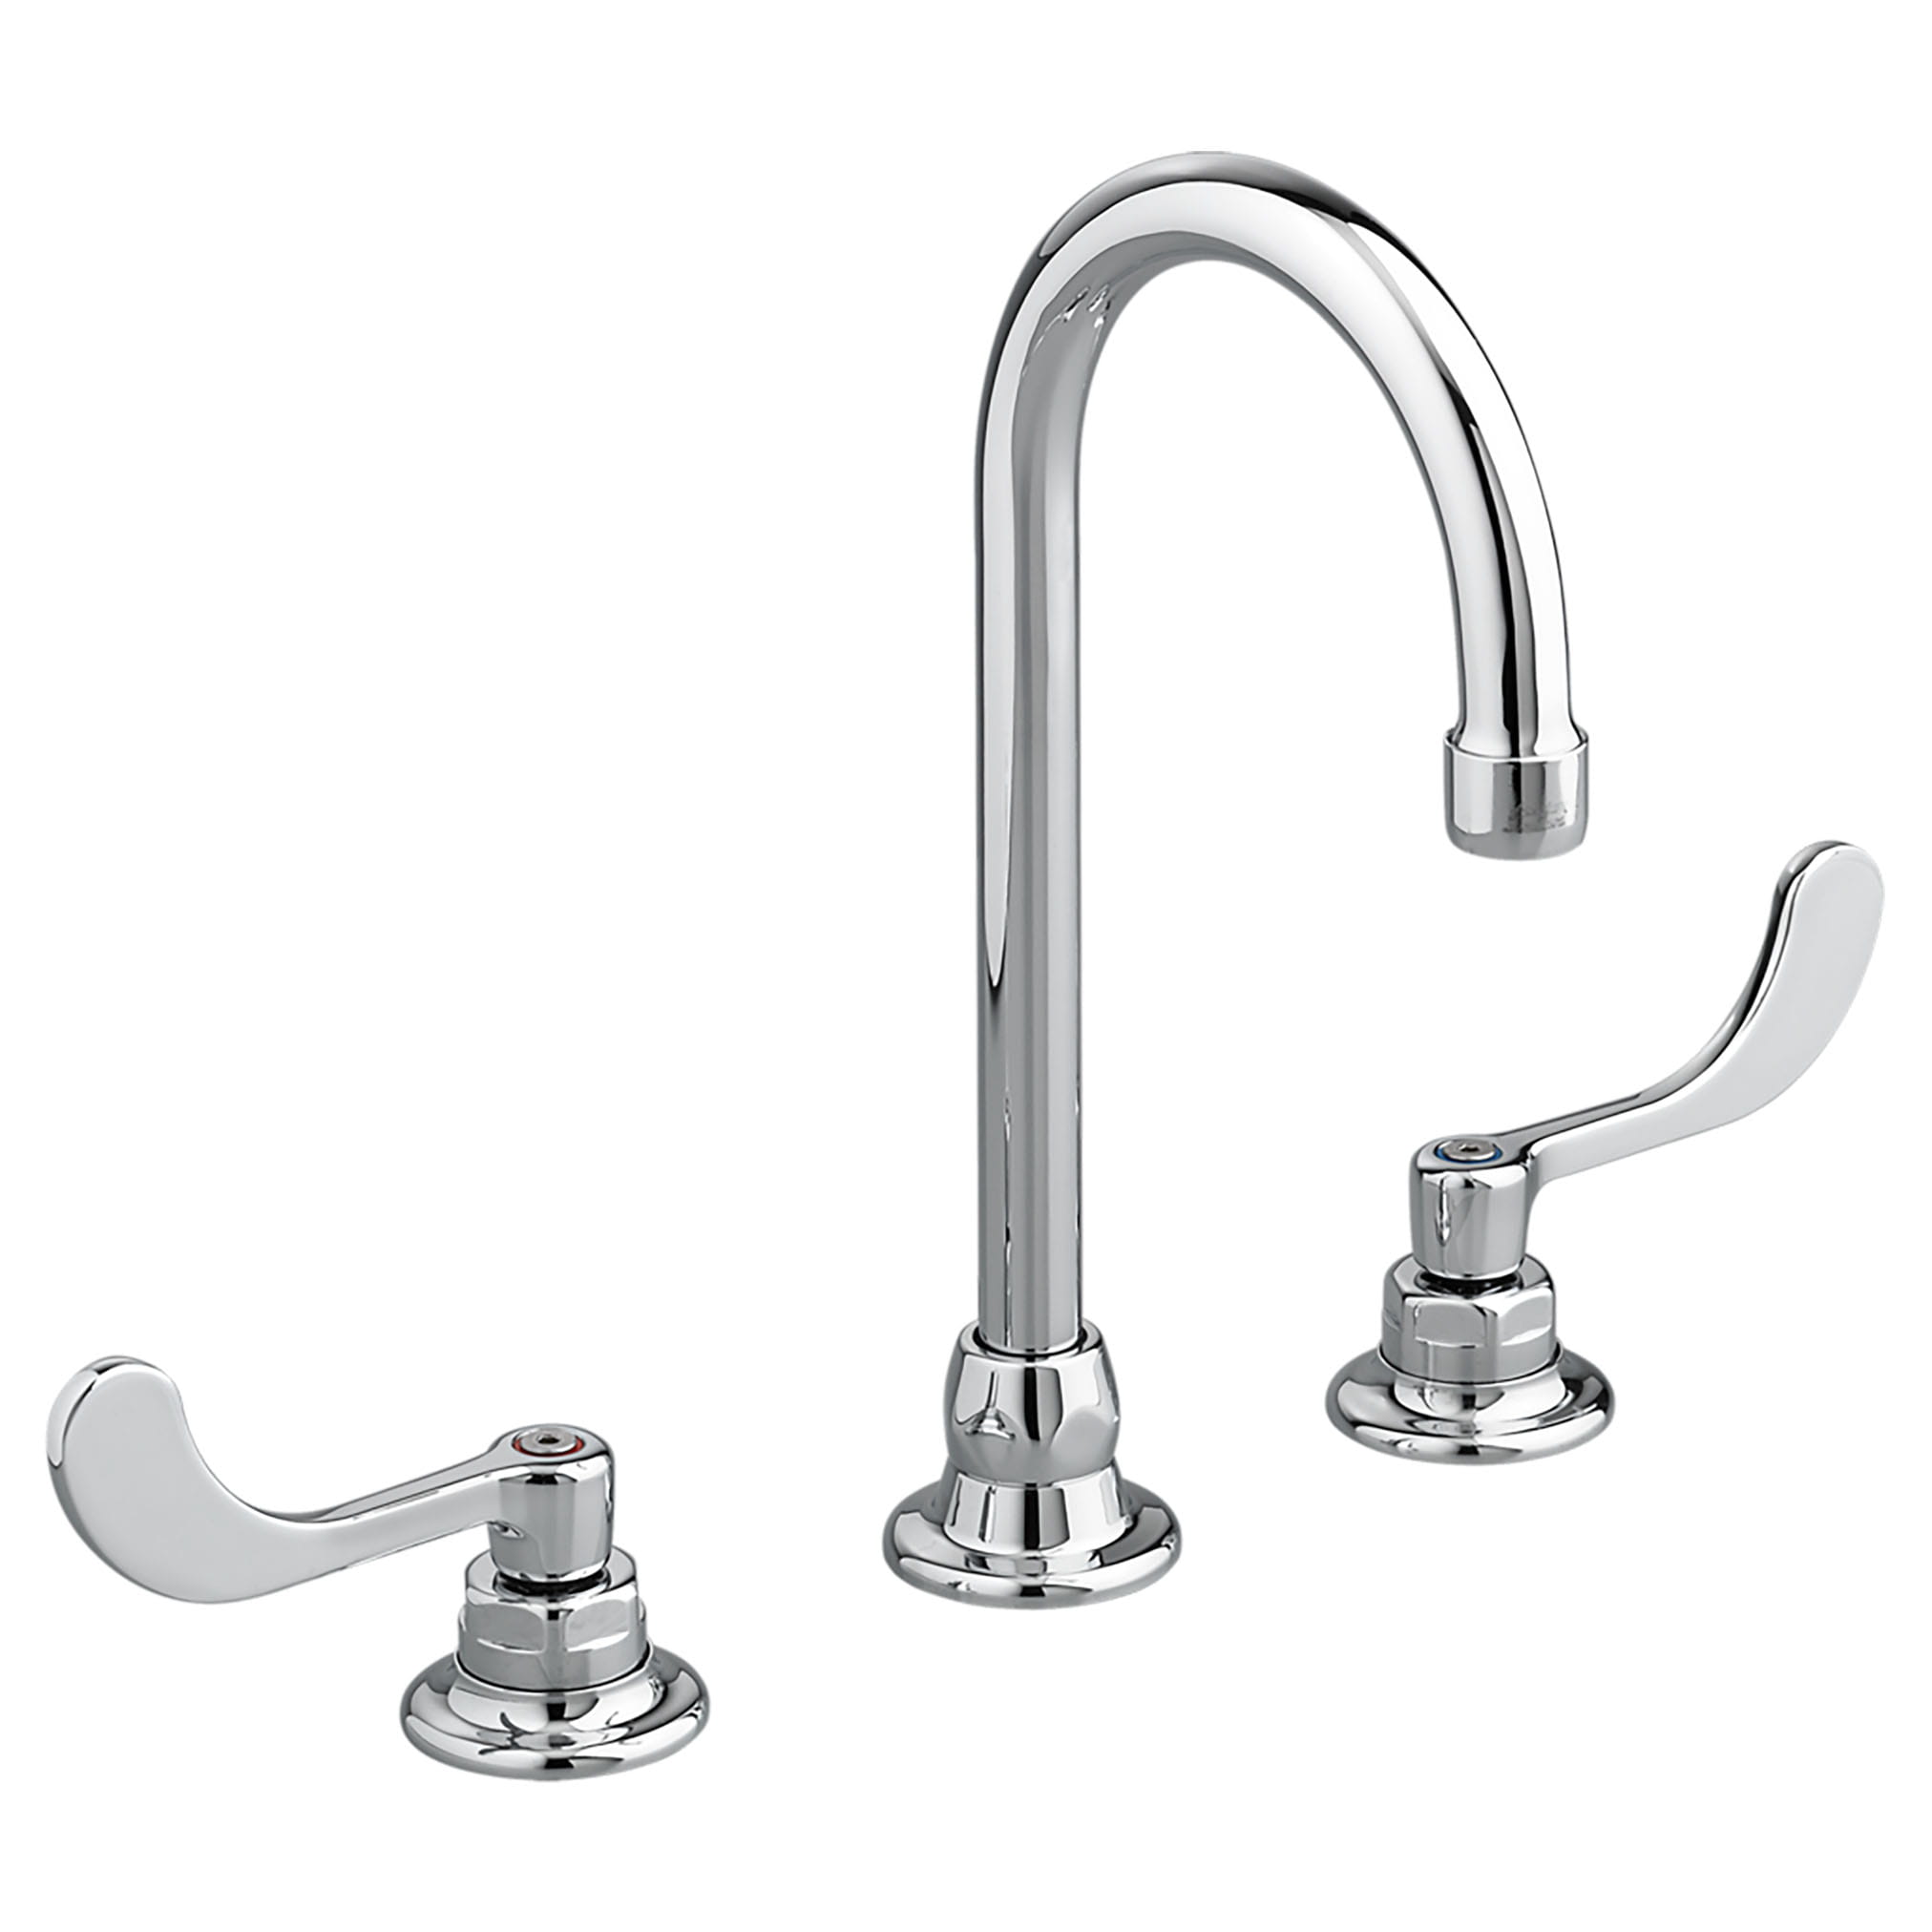 Monterrey® 8-Inch Widespread Gooseneck Faucet With Wrist Blade Handles 1.5 gpm/5.7 Lpm With 3rd Water Inlet